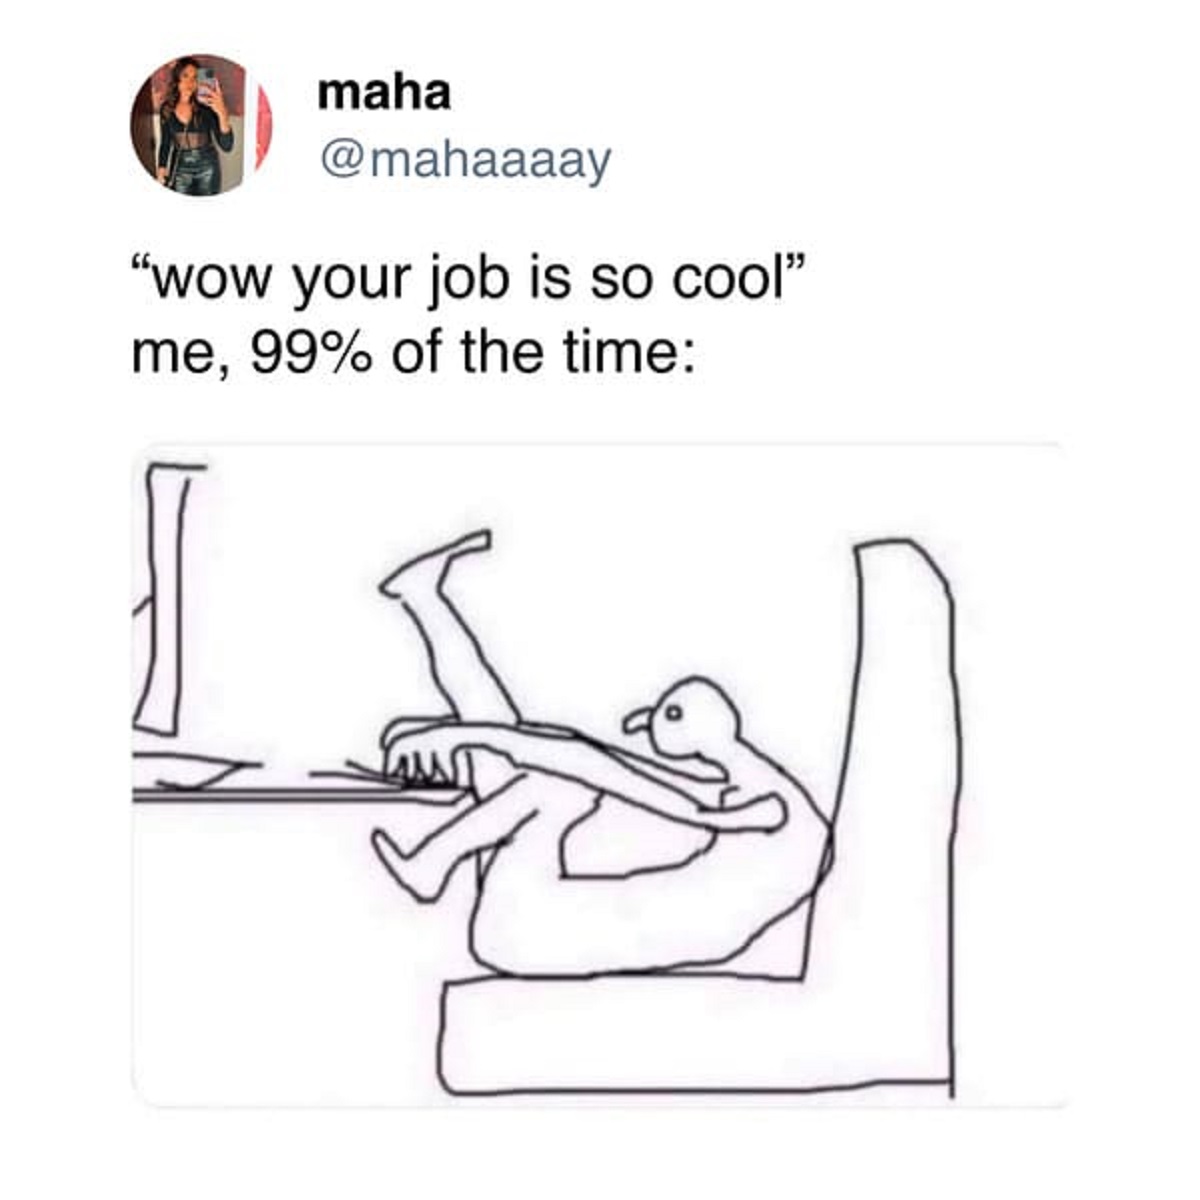 cartoon - maha "wow your job is so cool" me, 99% of the time